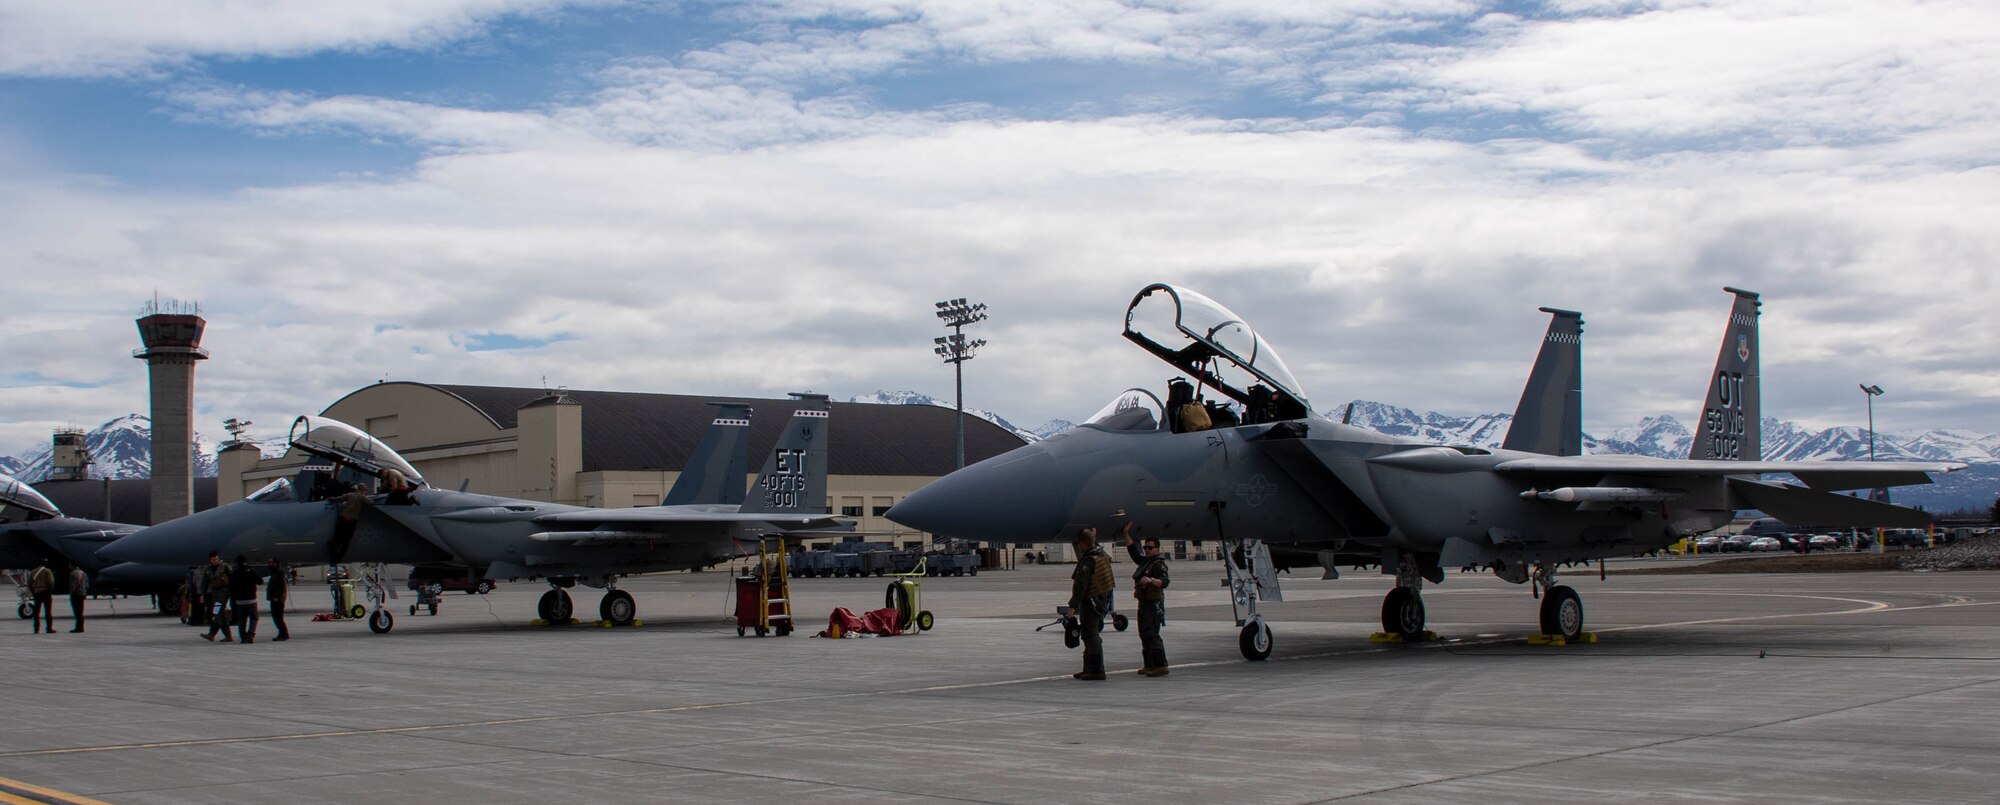 F-15EXs sit on the ramp prior to flight at Joint Base Elmendorf-Richardson in support of Northern Edge 2021. The purpose of the F-15EX’s participation in Northern Edge is to allow for immediate deep-end testing in a complex jamming environment to gather essential test data for what works and what needs improvement.